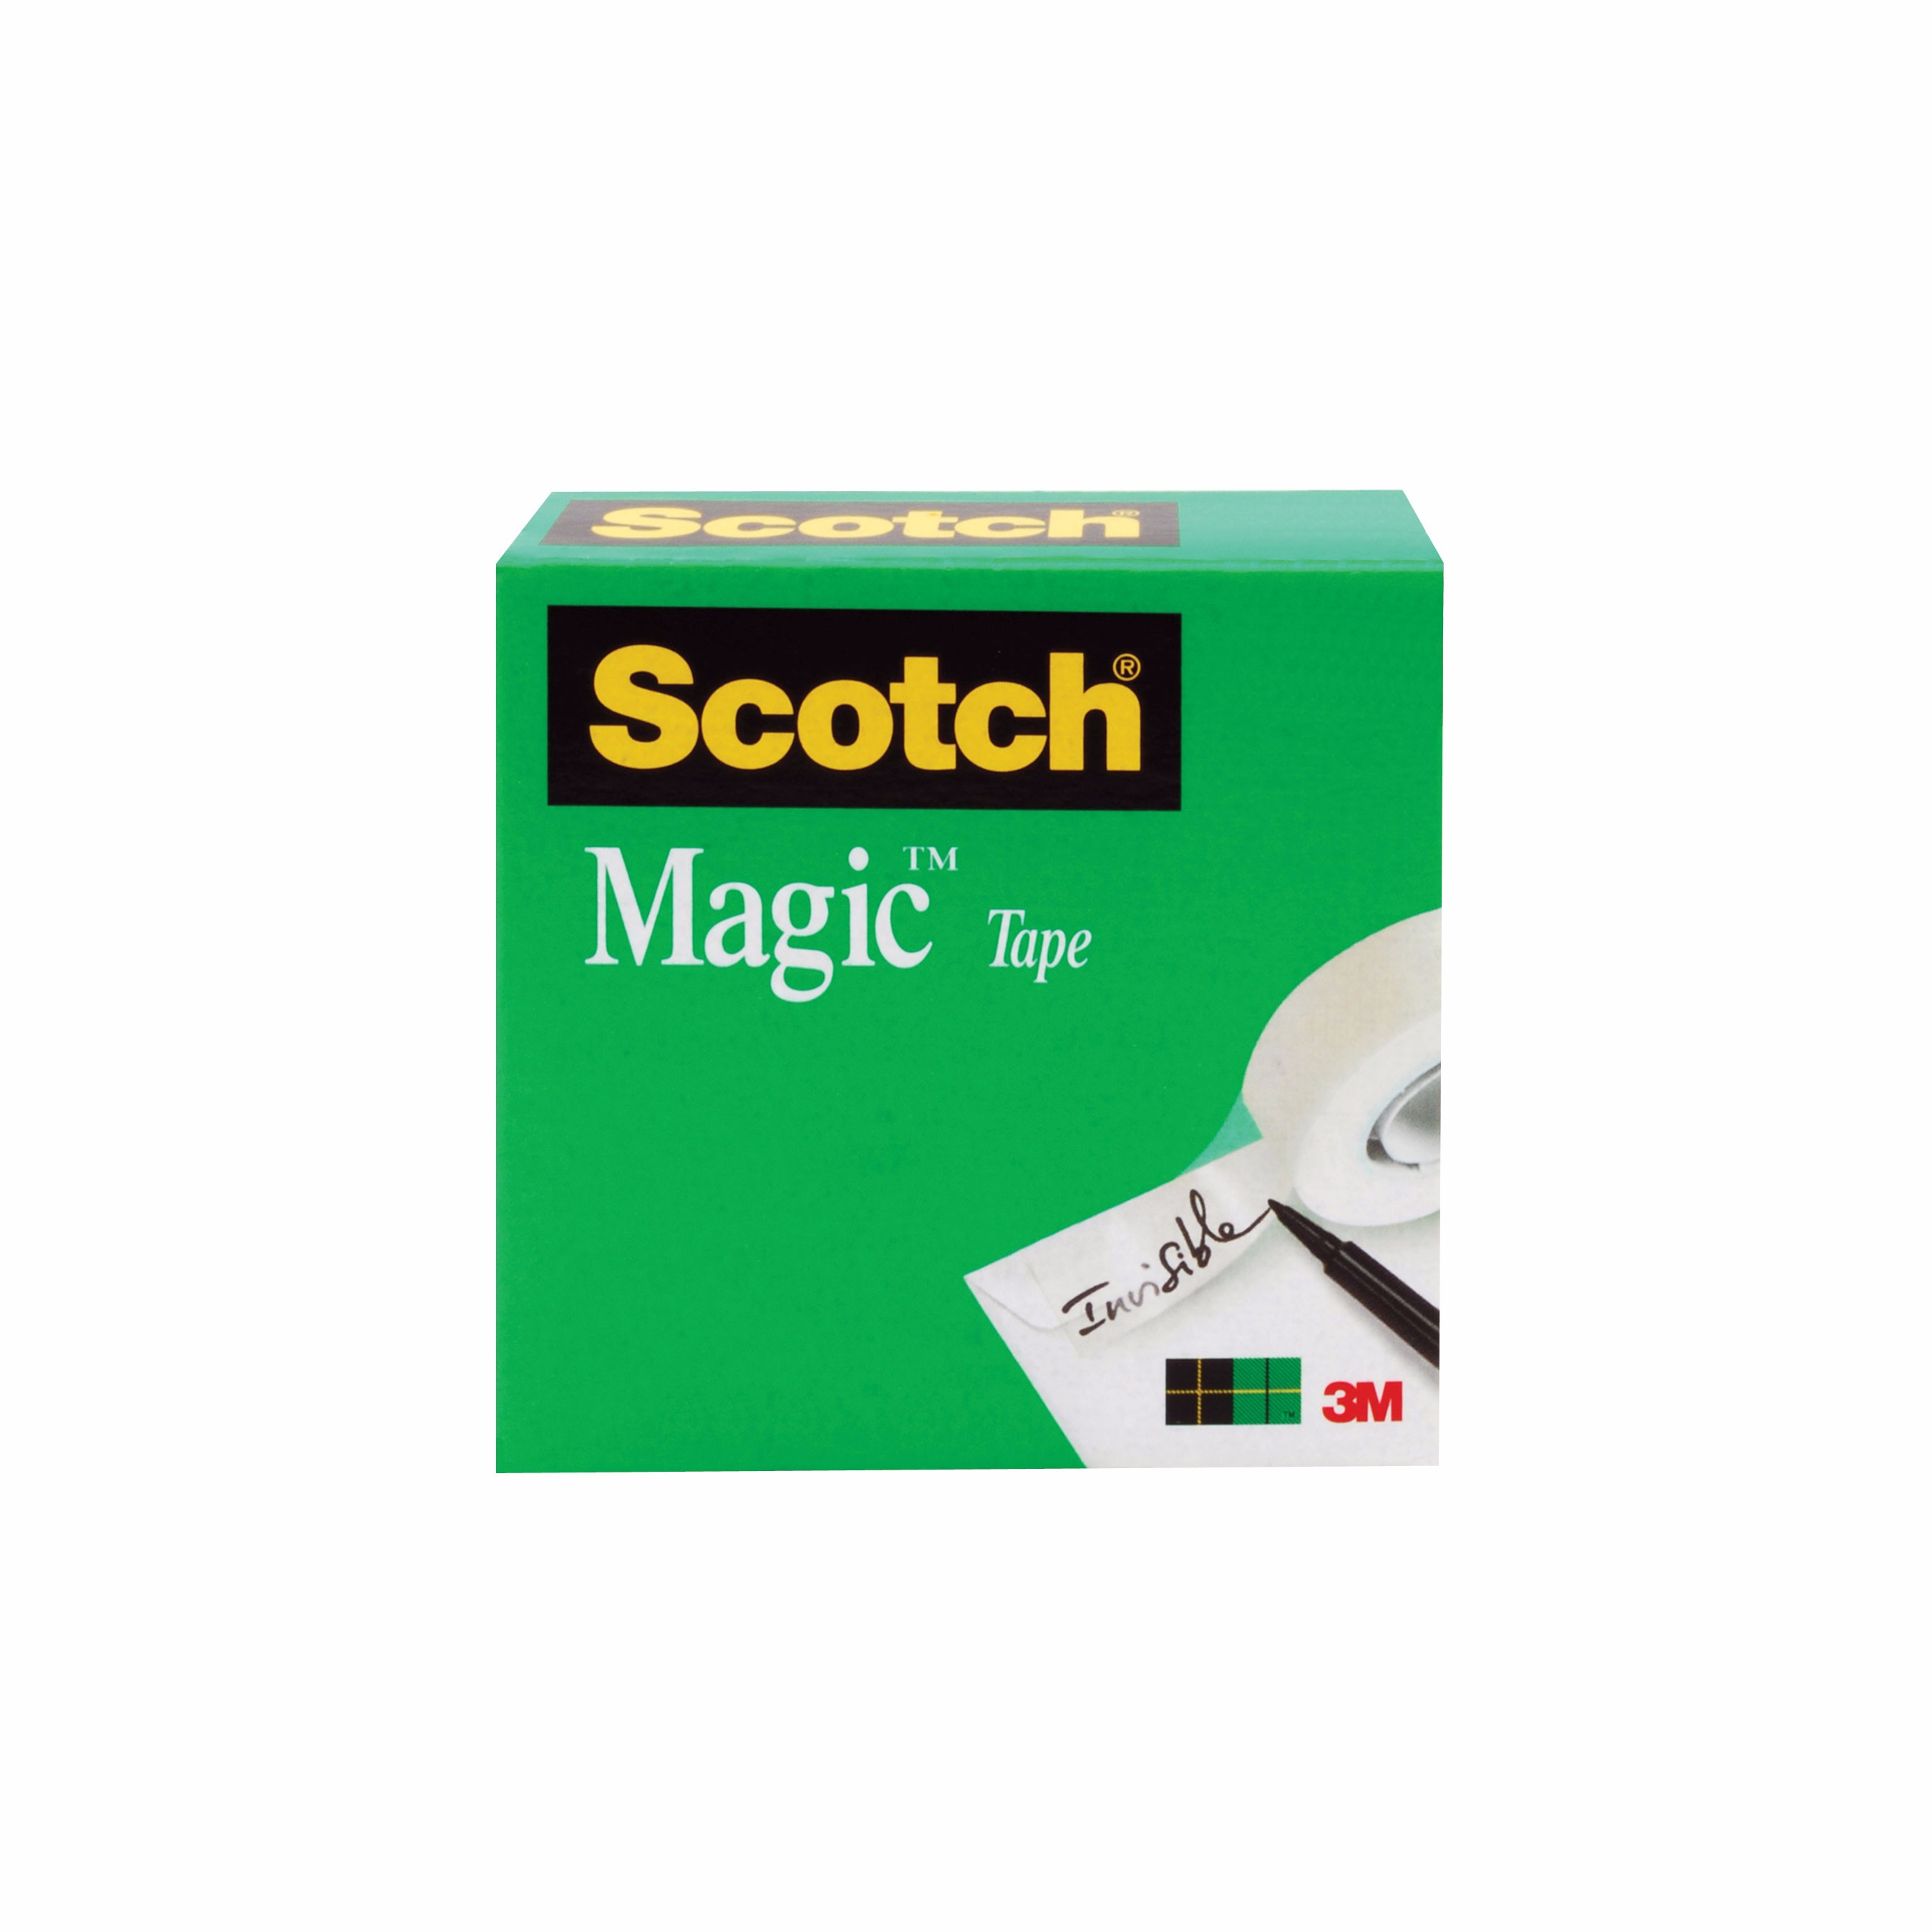 Scotch Tape, Double Sided, Permanent, 1/2 in x 400 in [11.1 yd] each - 2 rolls